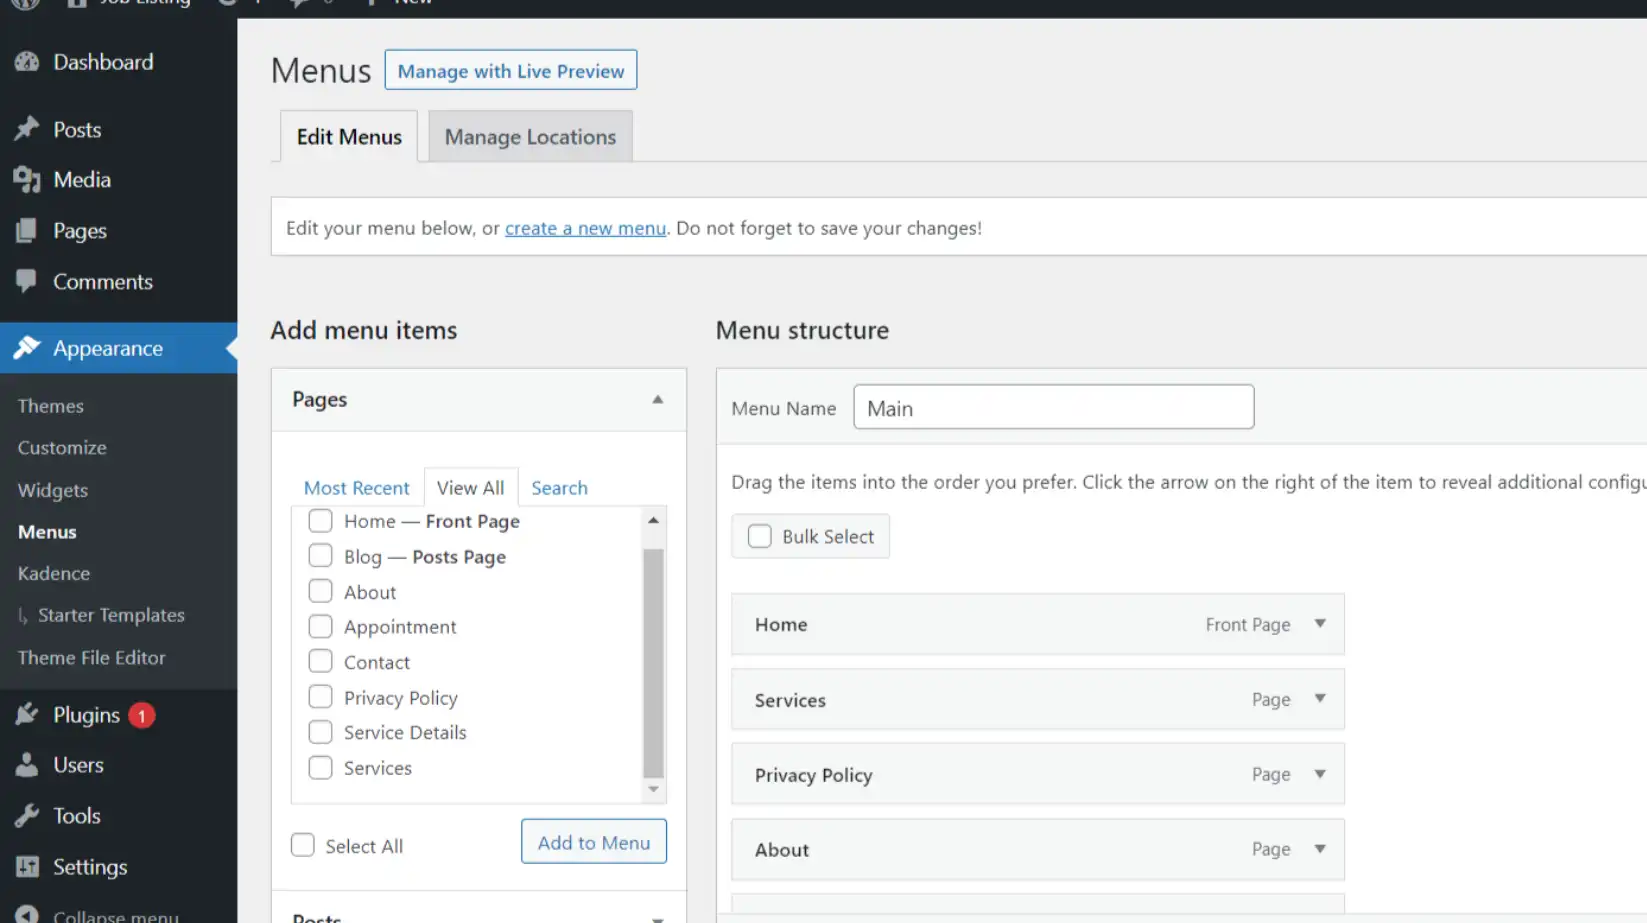 The menu structure visible in the "Menus" page in the back-end of WordPress.